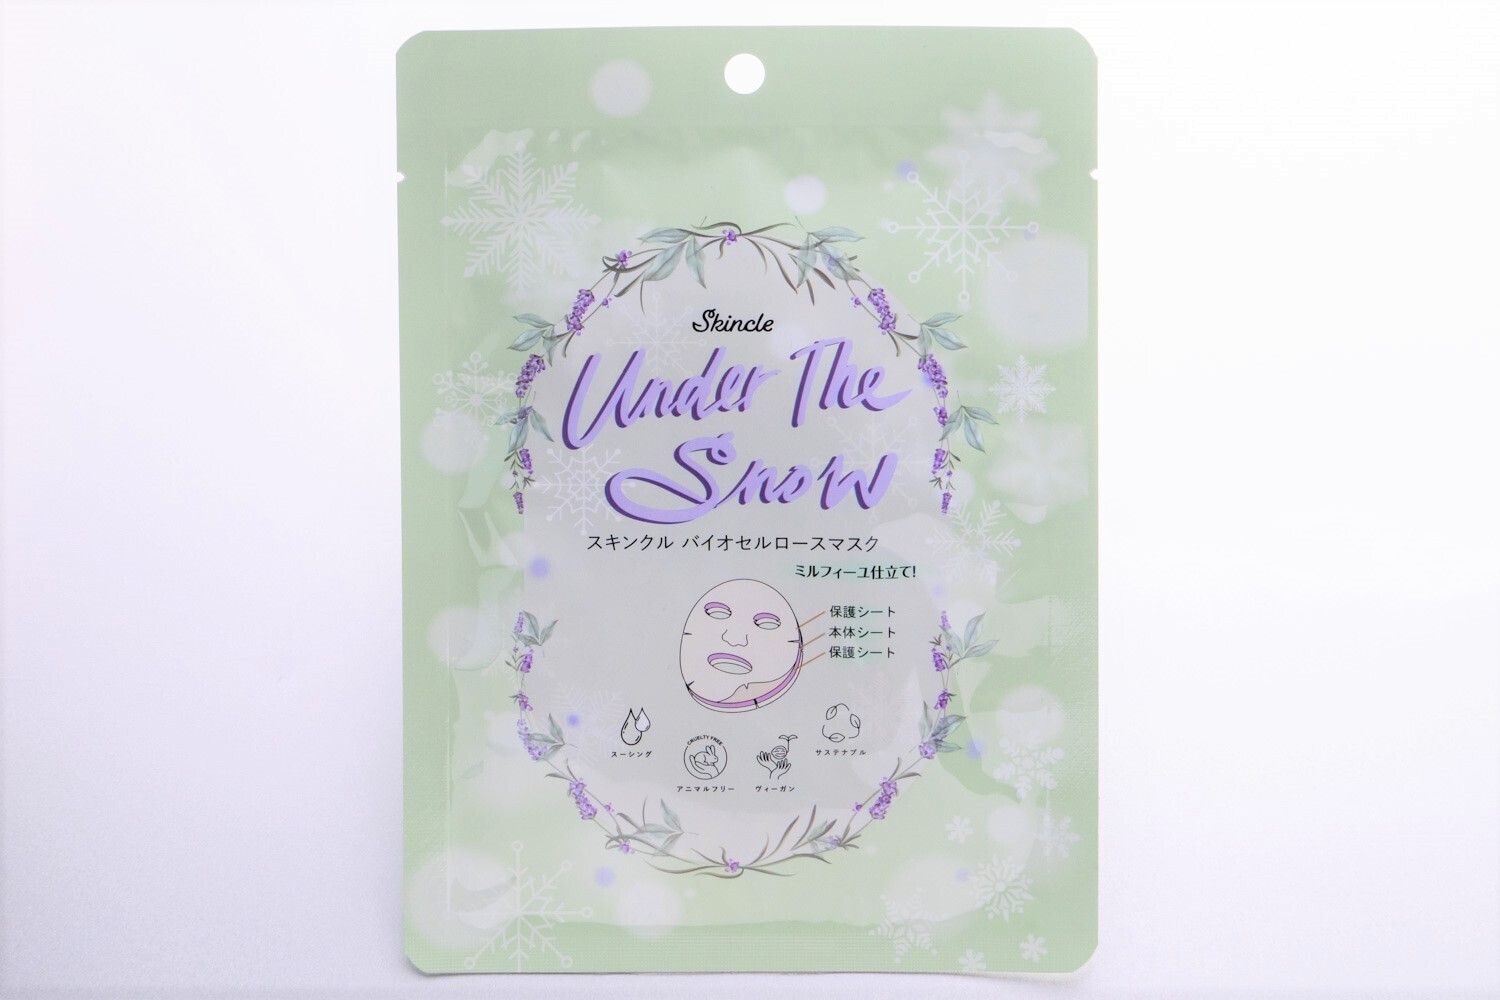 Skincle - Under the snow Bio cellulose mask